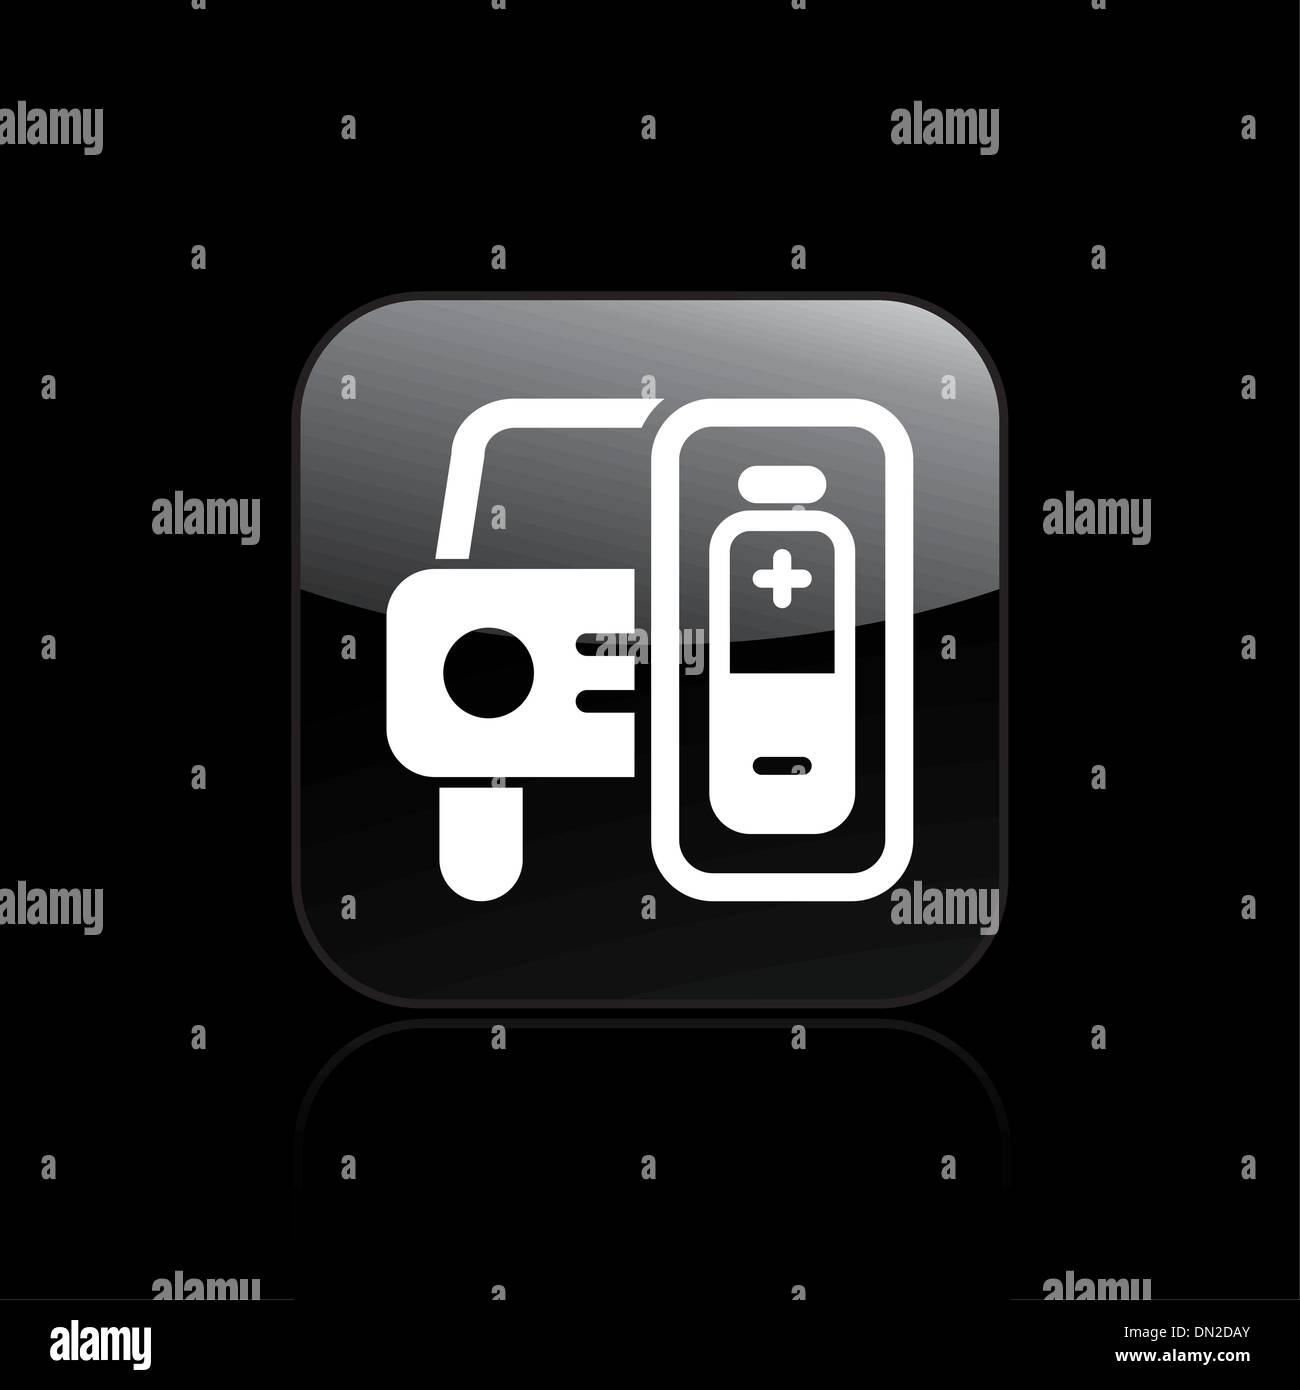 Vector illustration of single electric car icon Stock Vector